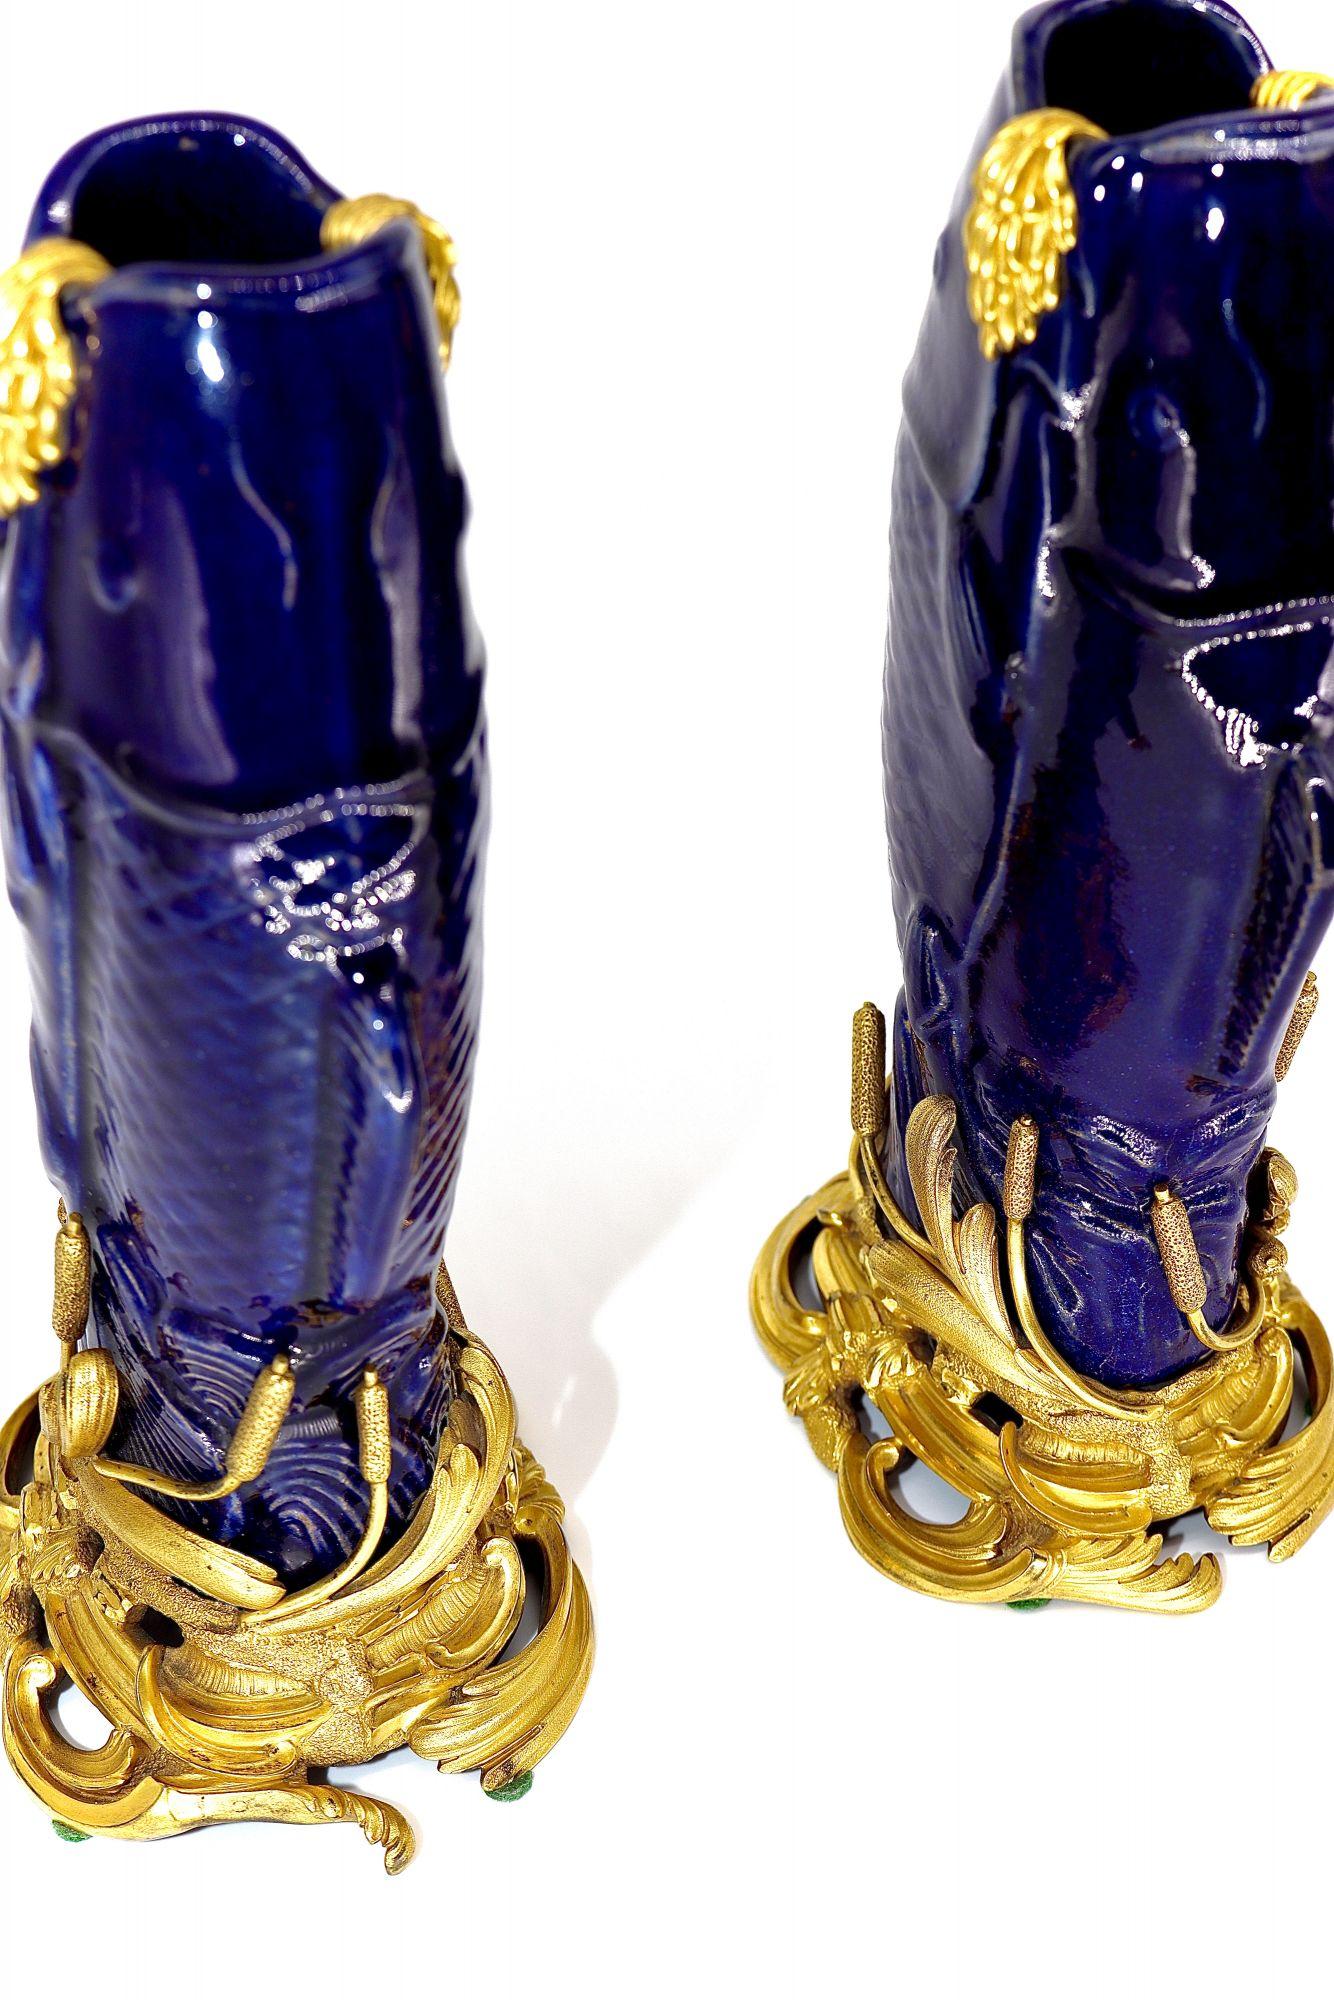 A pair of mounted porcelain Karp shaped vases. Gilt - Bronze Mounted Blue Enameled Stoneware, Chinese 18th Century, the Mounts are Louis XV, Circa 1750. The term ‘mounted porcelains’ refers to pieces of porcelain — originally produced in China,